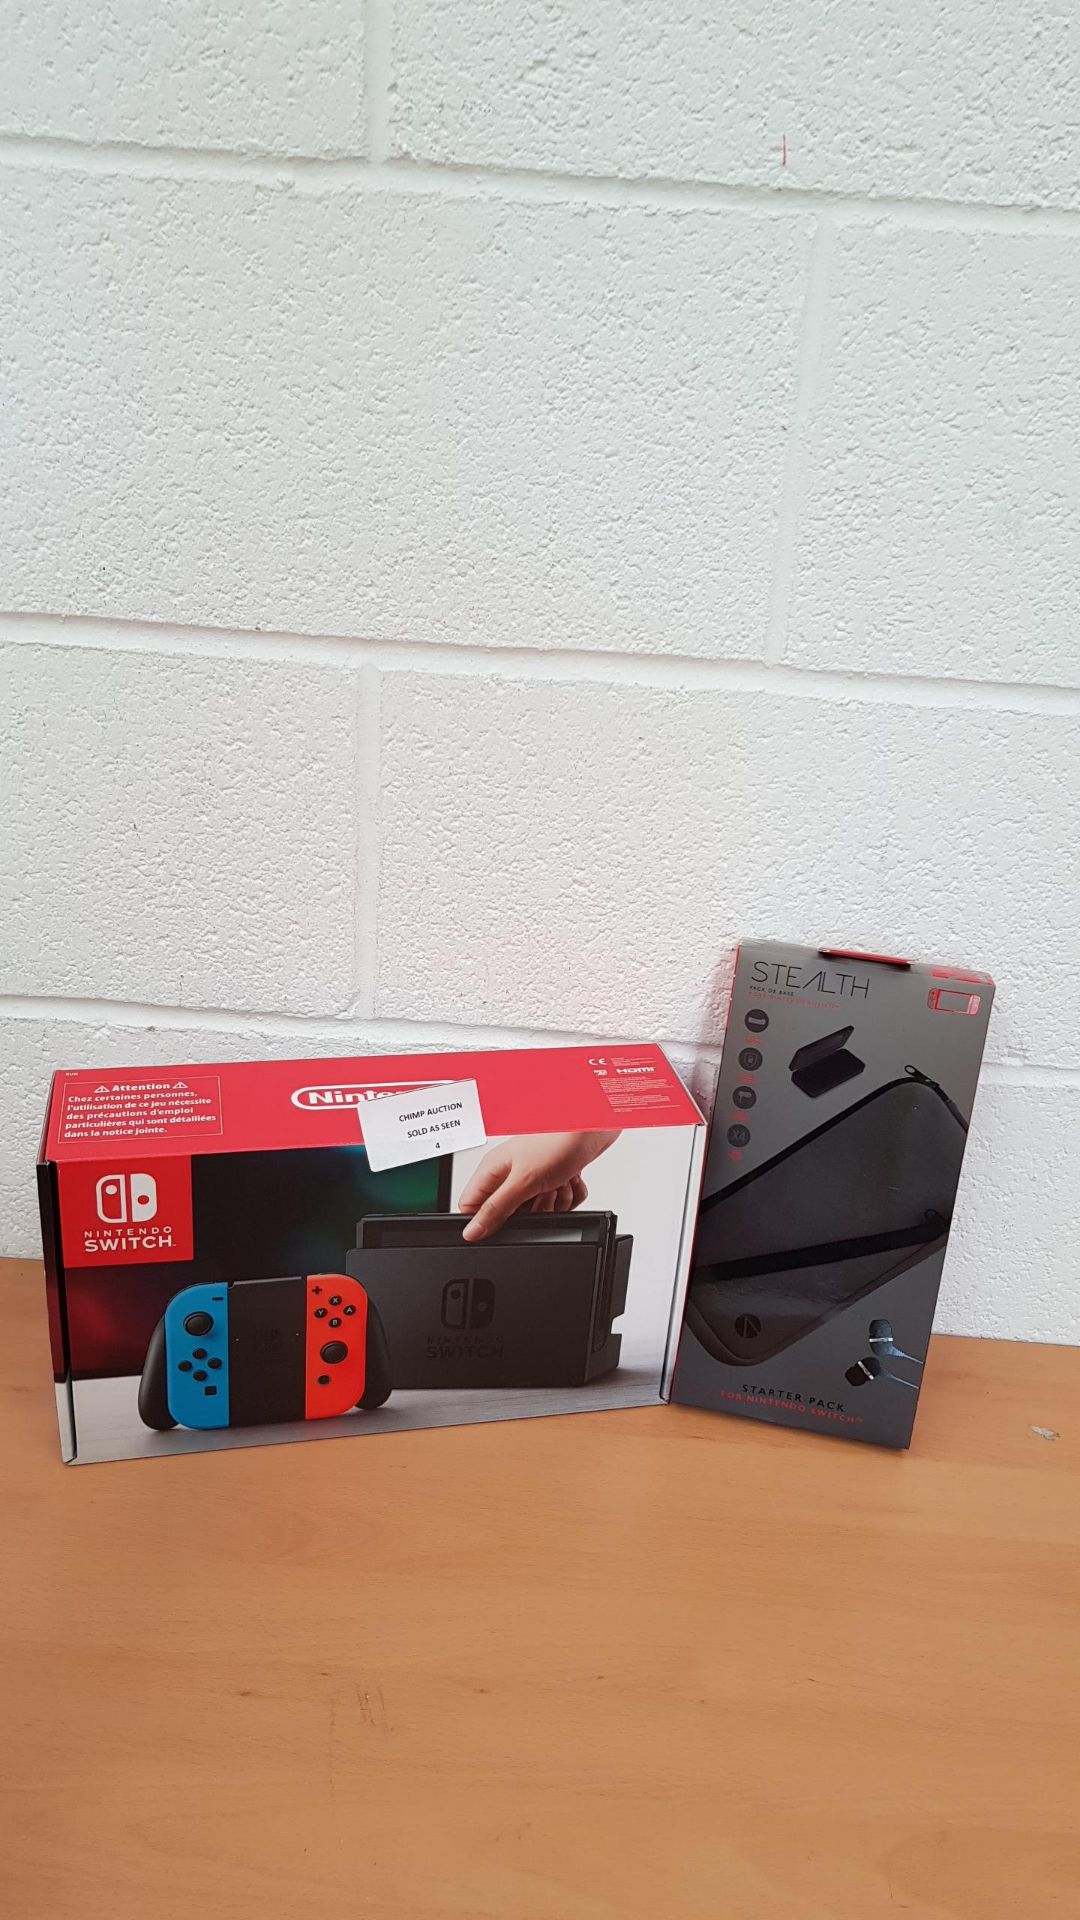 Nintendo Switch 32GB Console + Stealth Starter Pack bundle RRP £359.99.